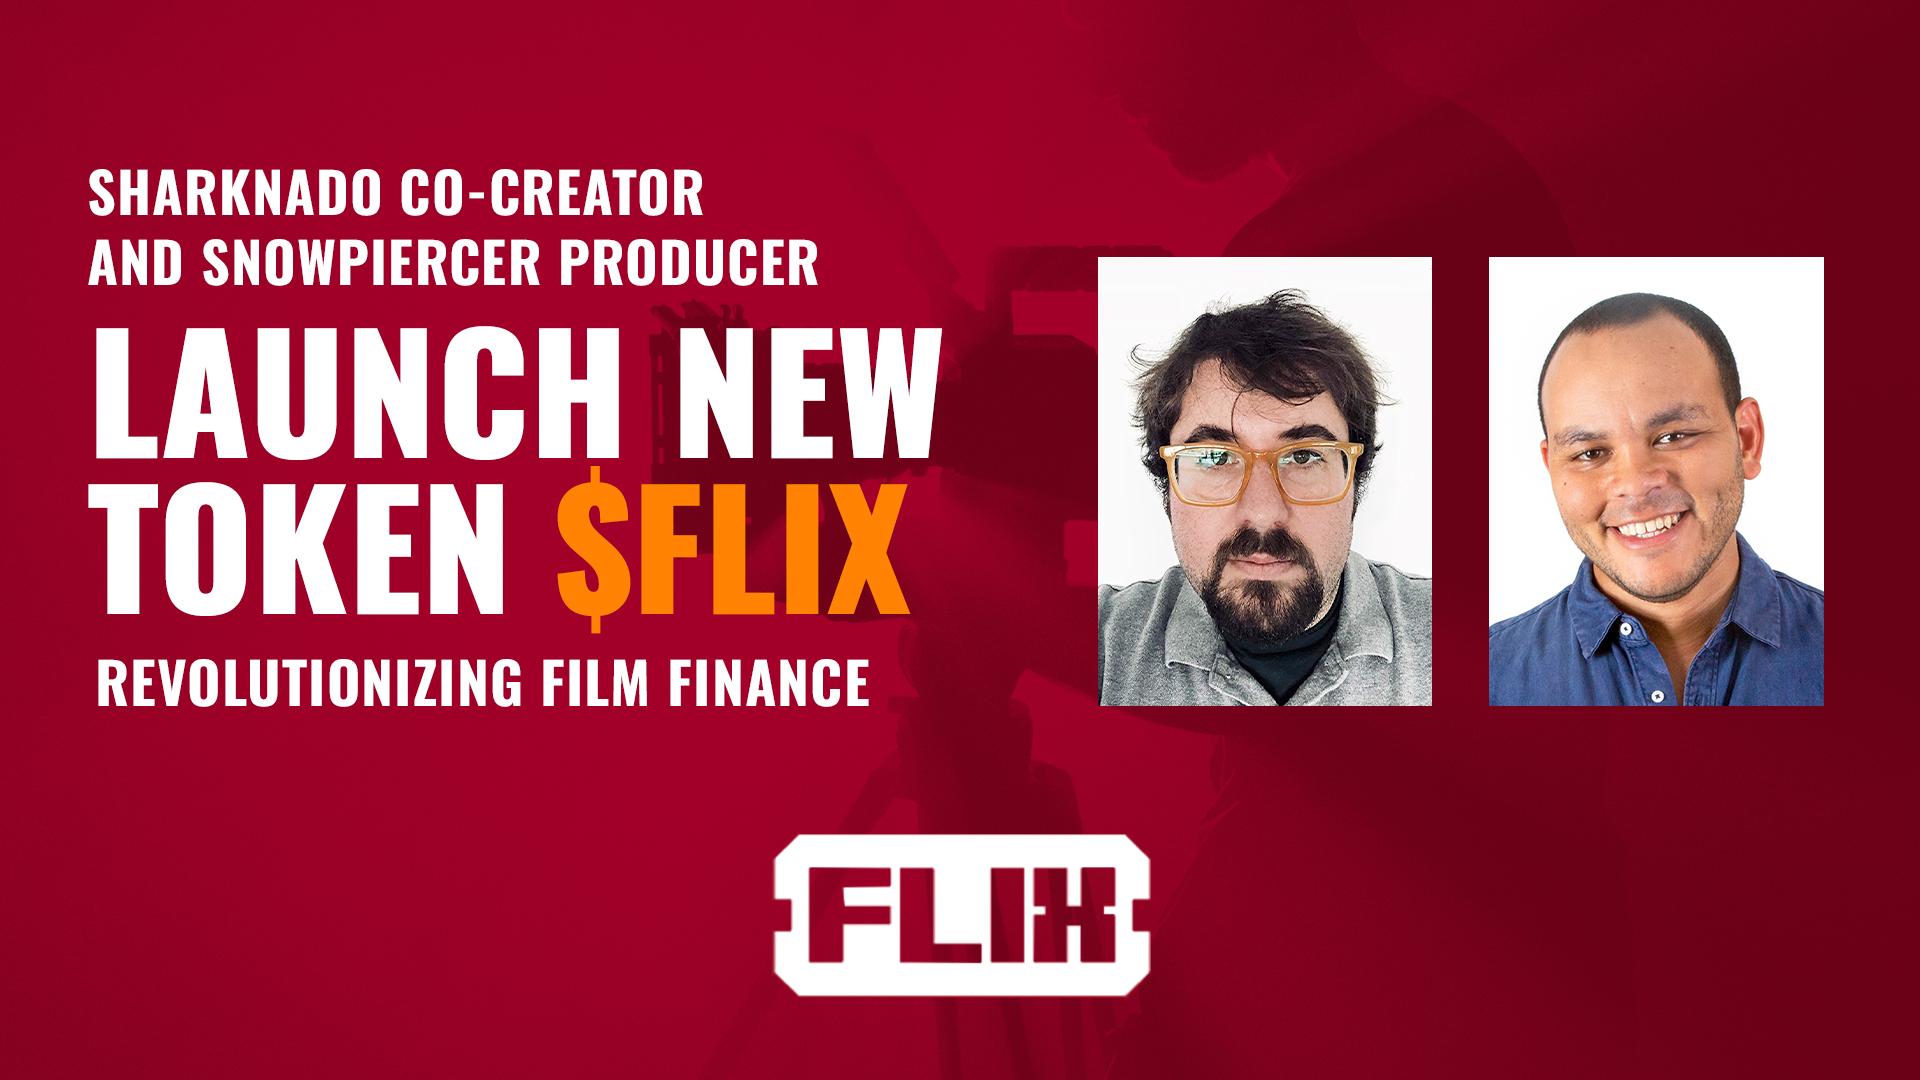 Sharknado Co-Creator and Snowpiercer Producer Launch New Token $FLIX to Revolutionize Indie Film 4